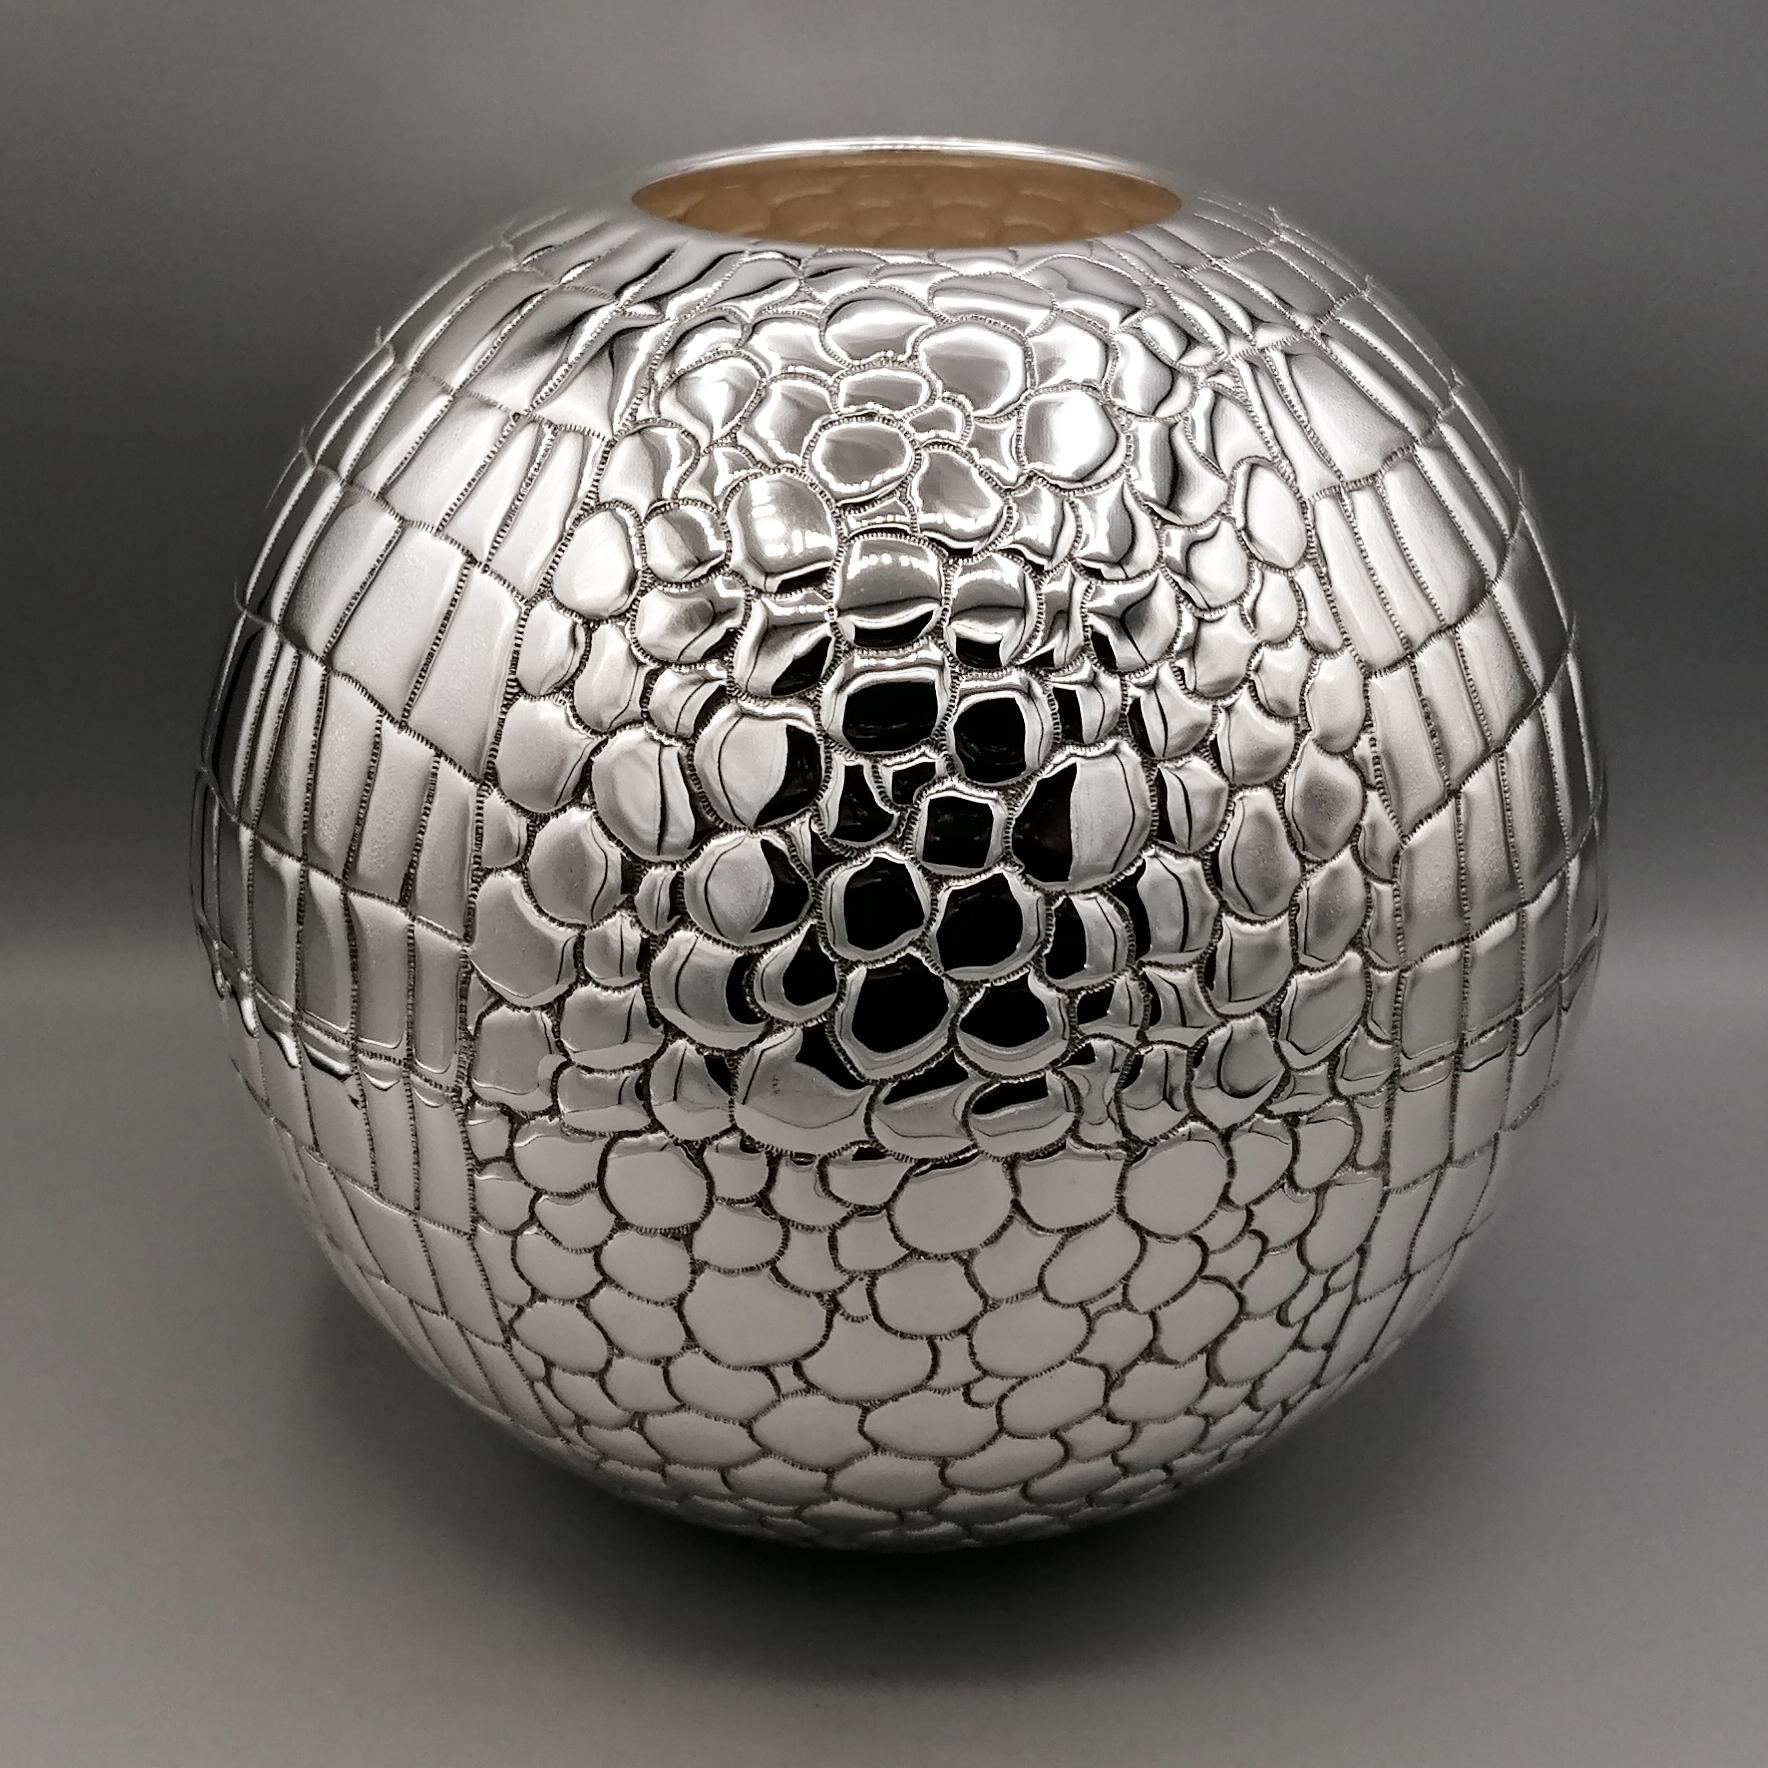 Spherical shaped sterling silver vase. The large diameter of the vase allows you to have a large opening to insert the flowers. The diameter of the 